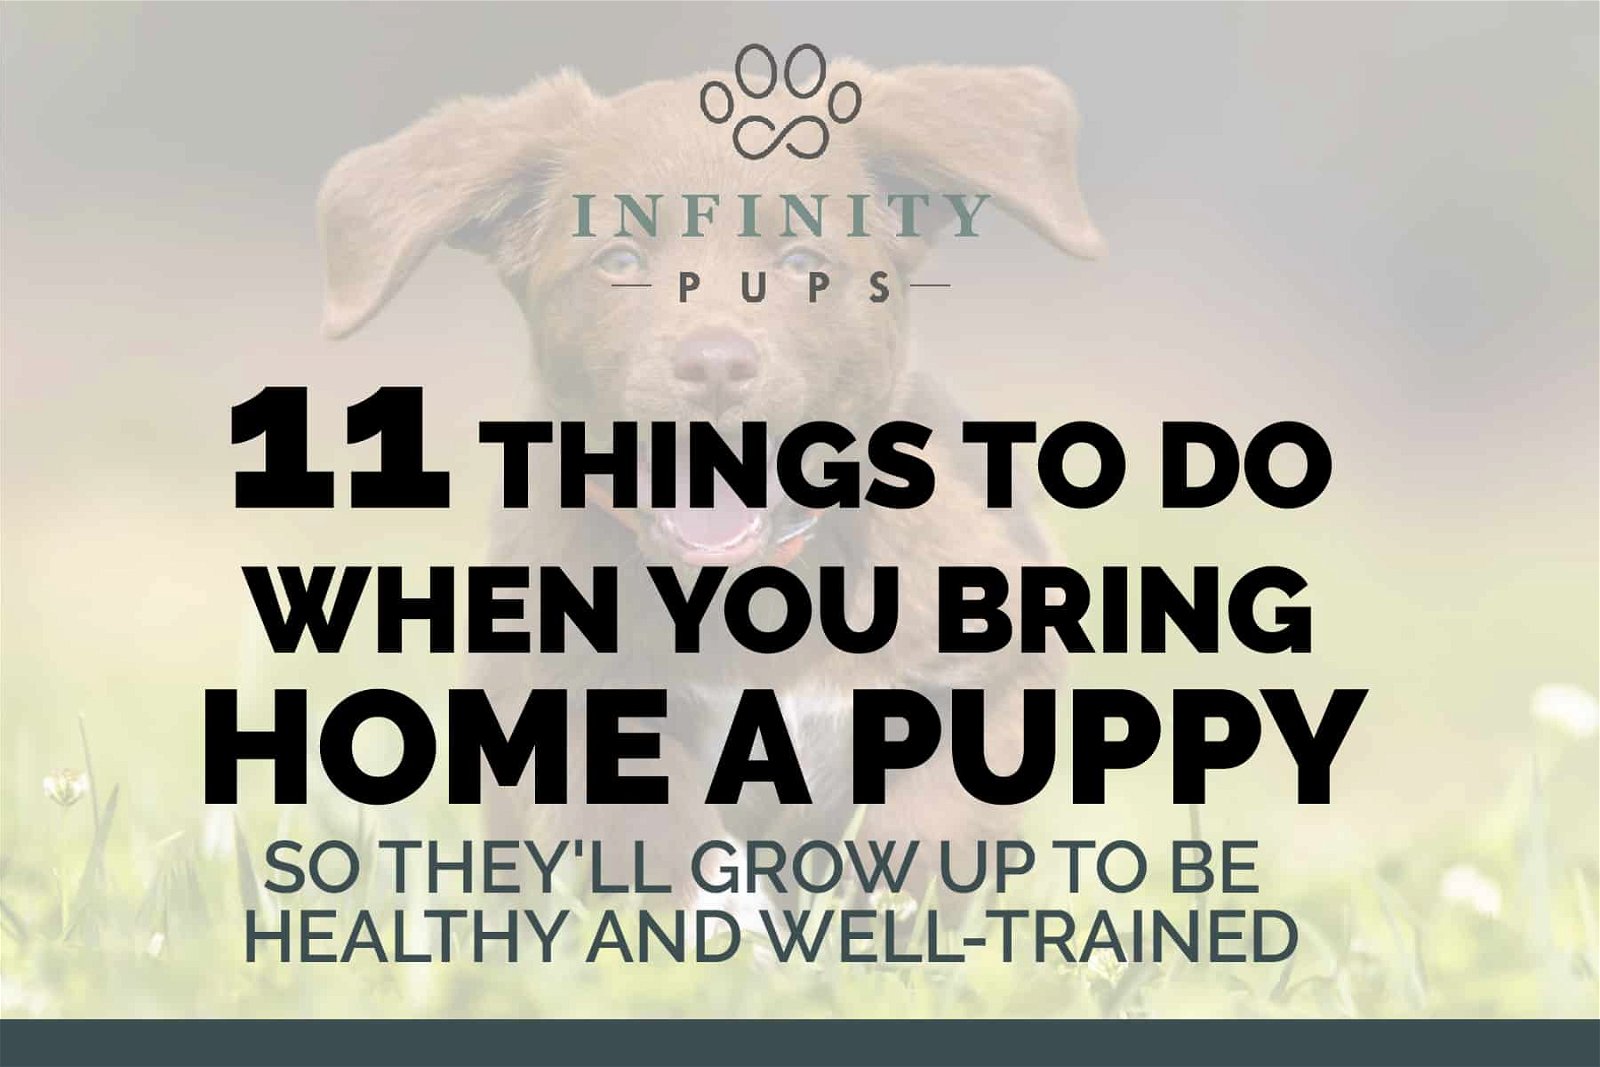 11 Things To Do When You Bring Home A Puppy (so they'll be healthy & well-trained) 9